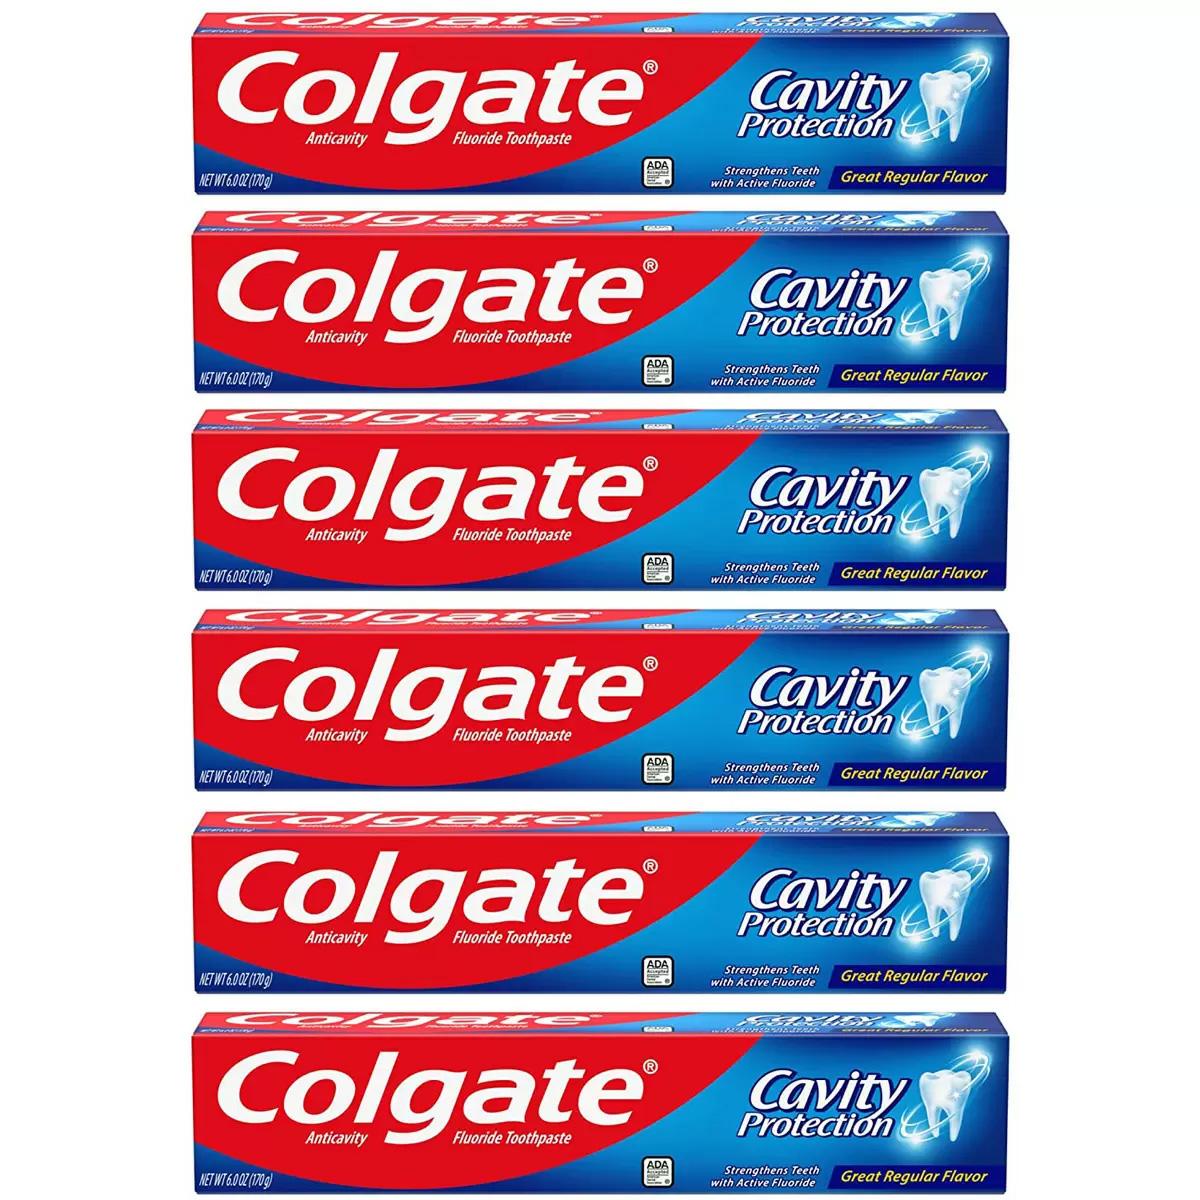 6 Colgate Cavity Protection Toothpaste with Fluoride for $6.73 Shipped